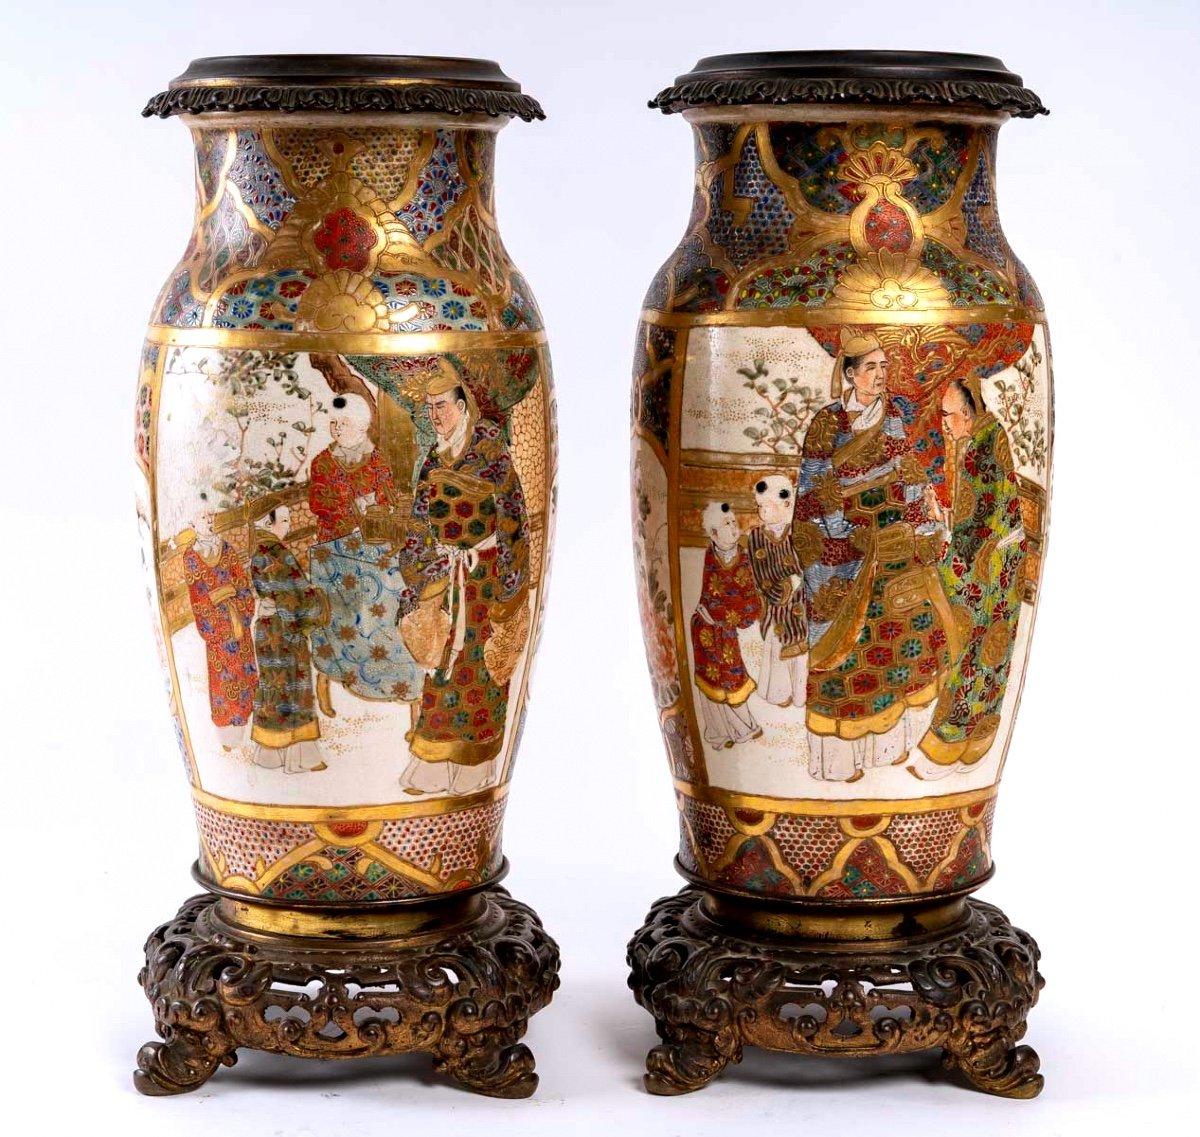 Pair of Satsuma Ceramic Vases Mounted on French Bronze, Period: Meiji, 19th For Sale 1